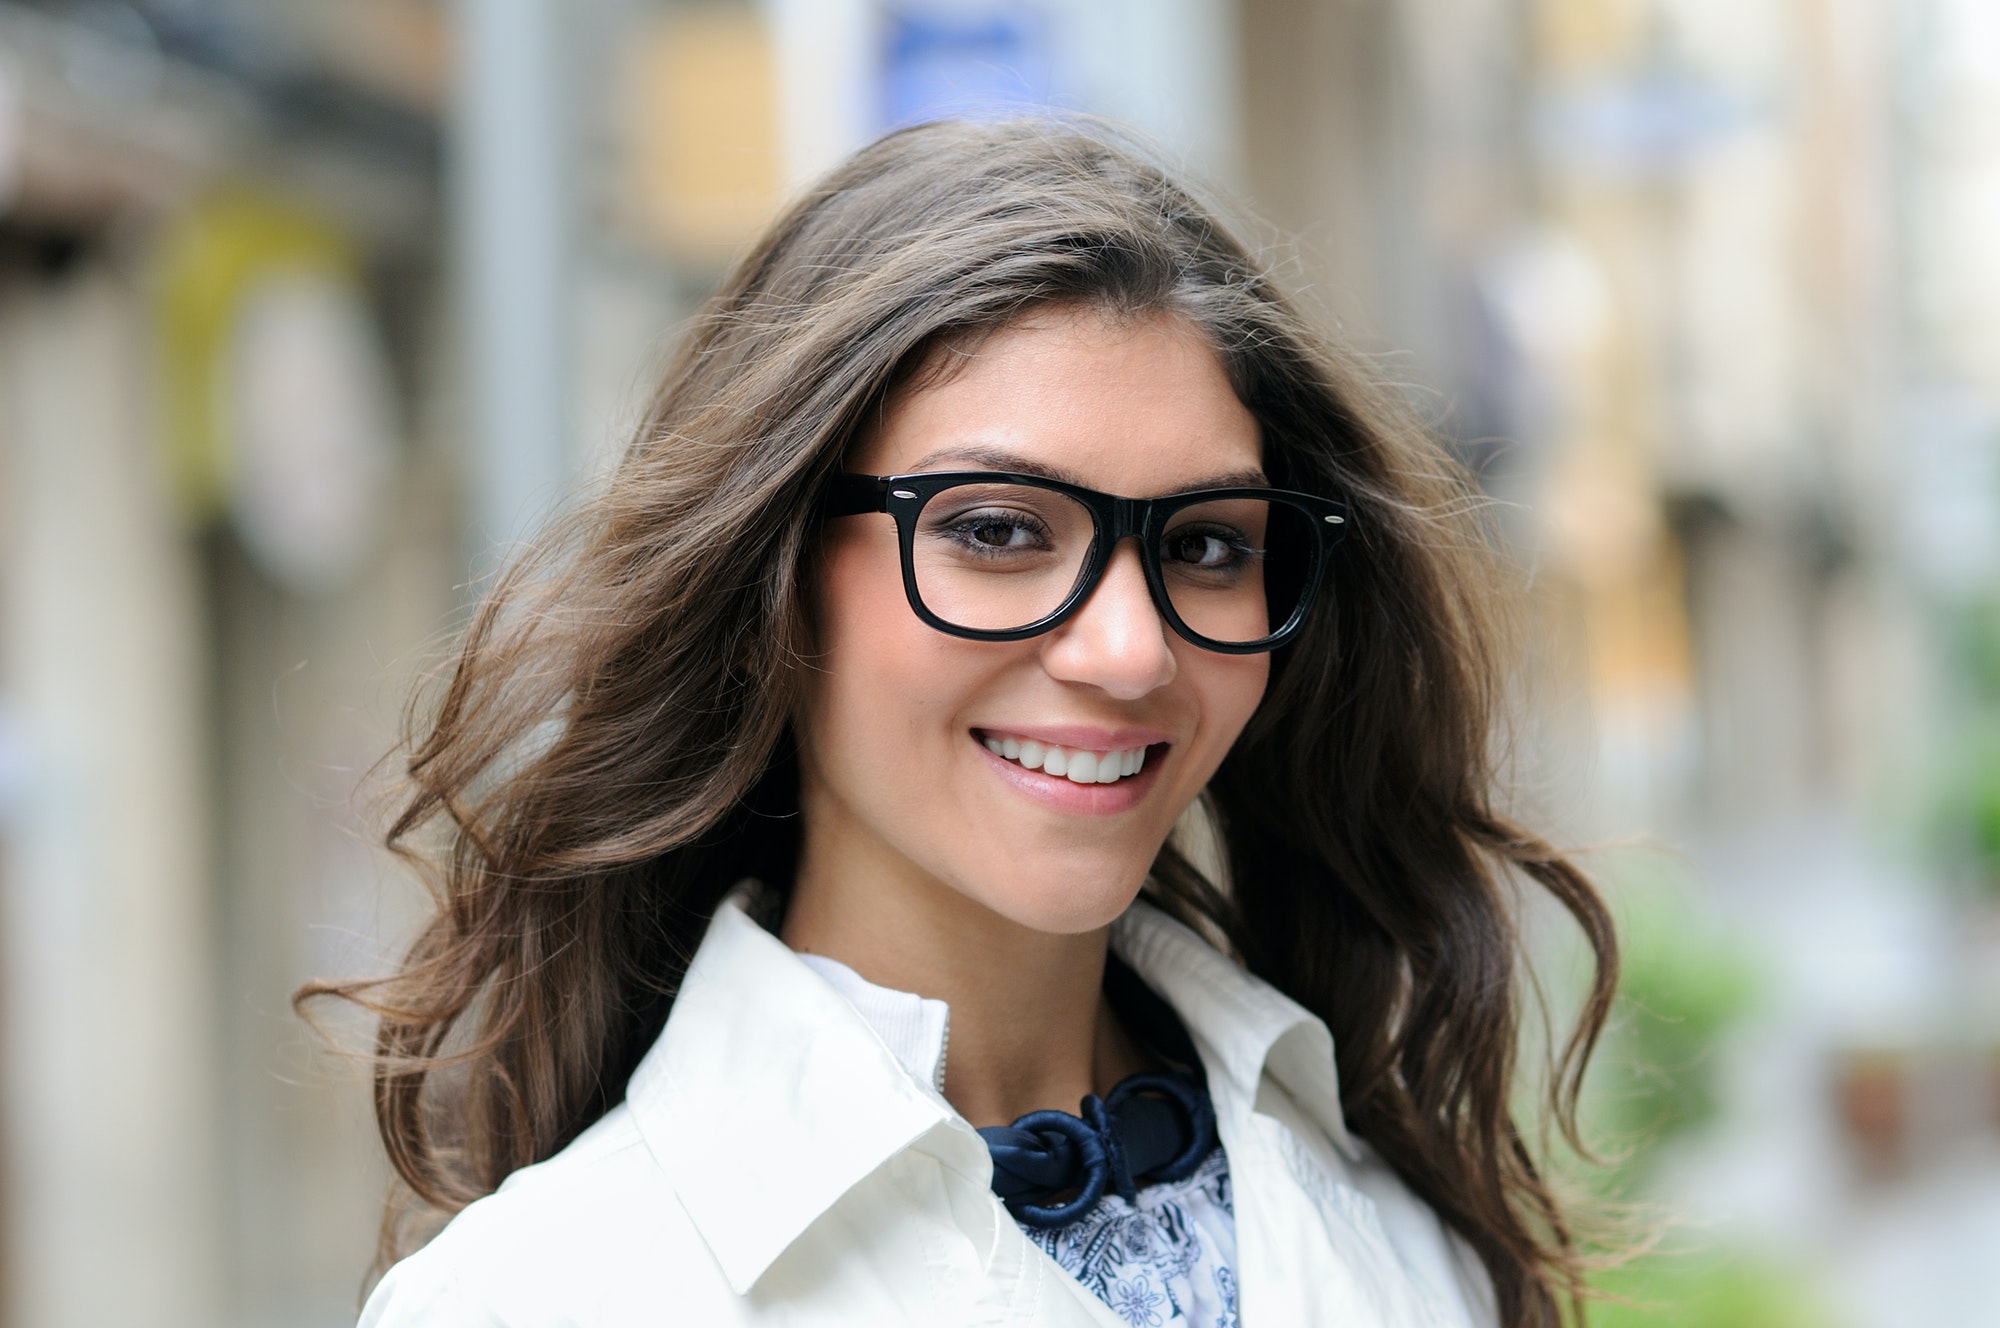 Beautiful woman with eye glasses smiling in urban background